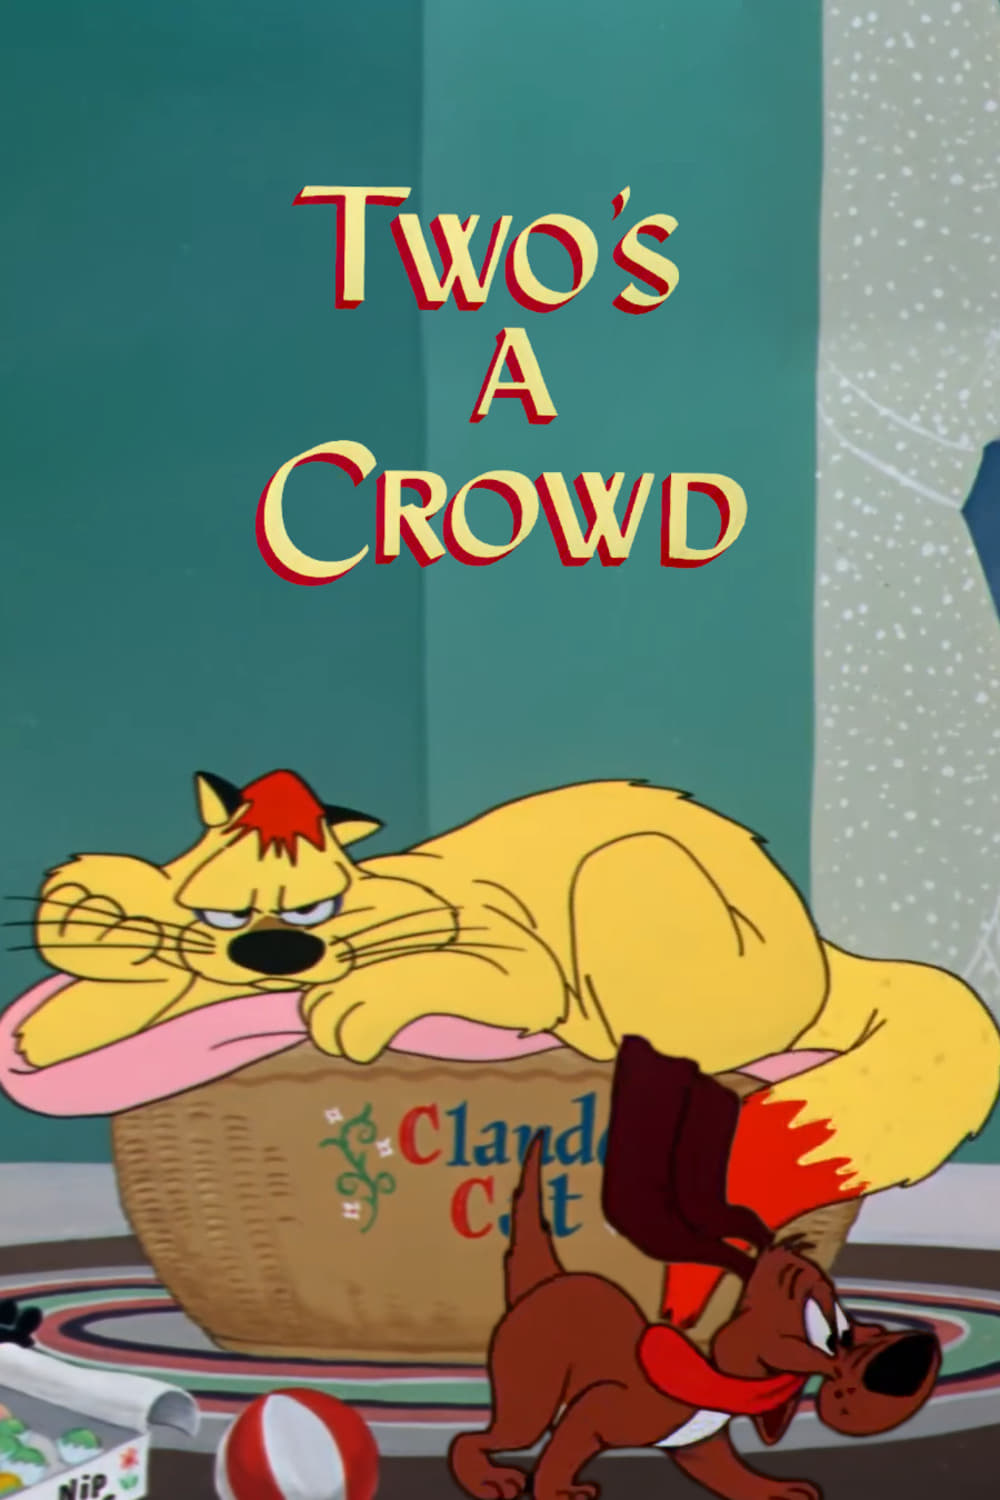 Two's a Crowd (1950)